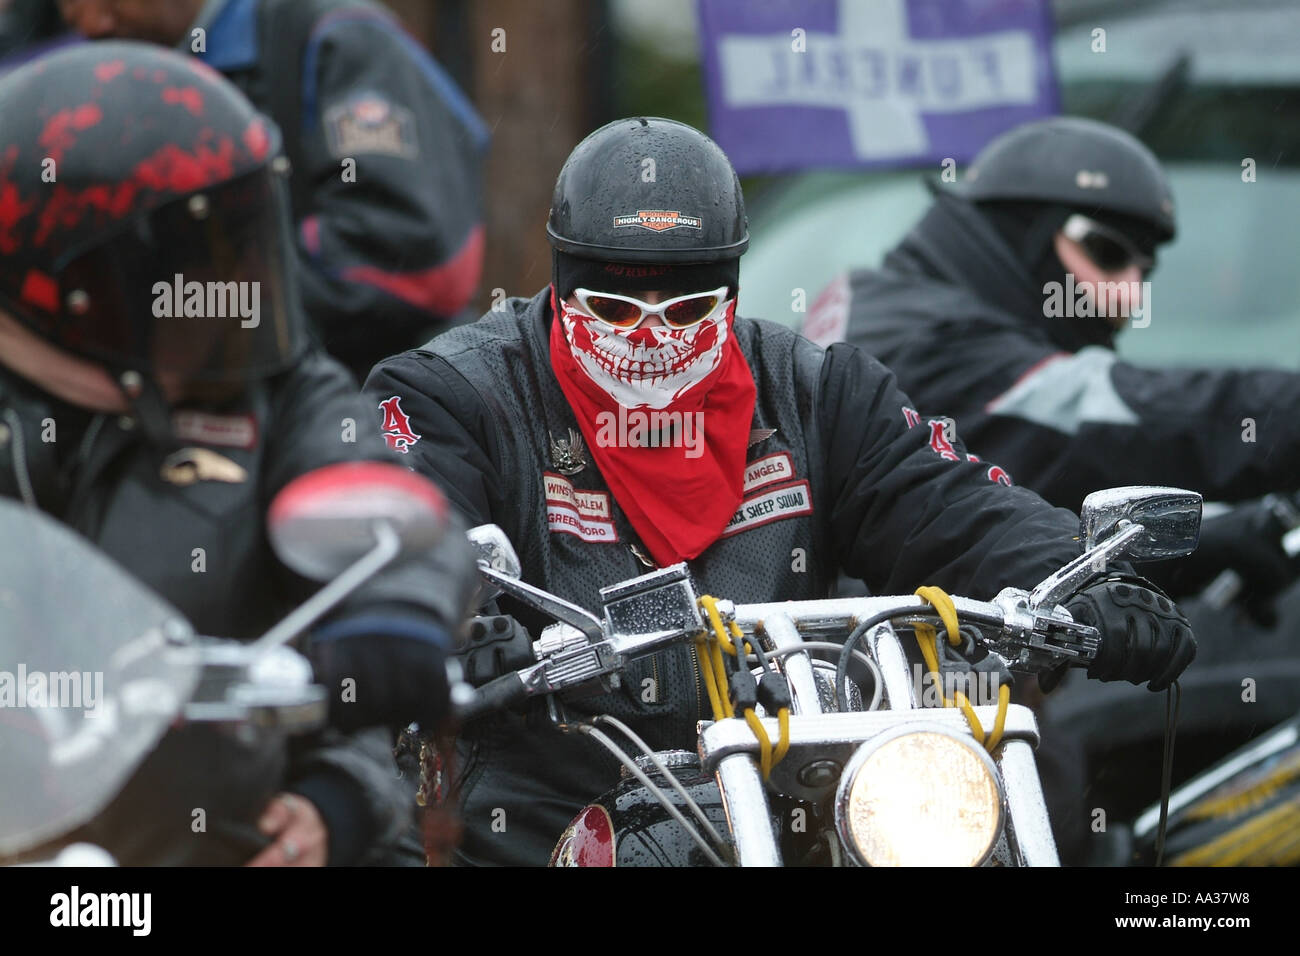 Hells Angels Funeral Motorcycle club members at funeral for member who was gunned down Stock Photo